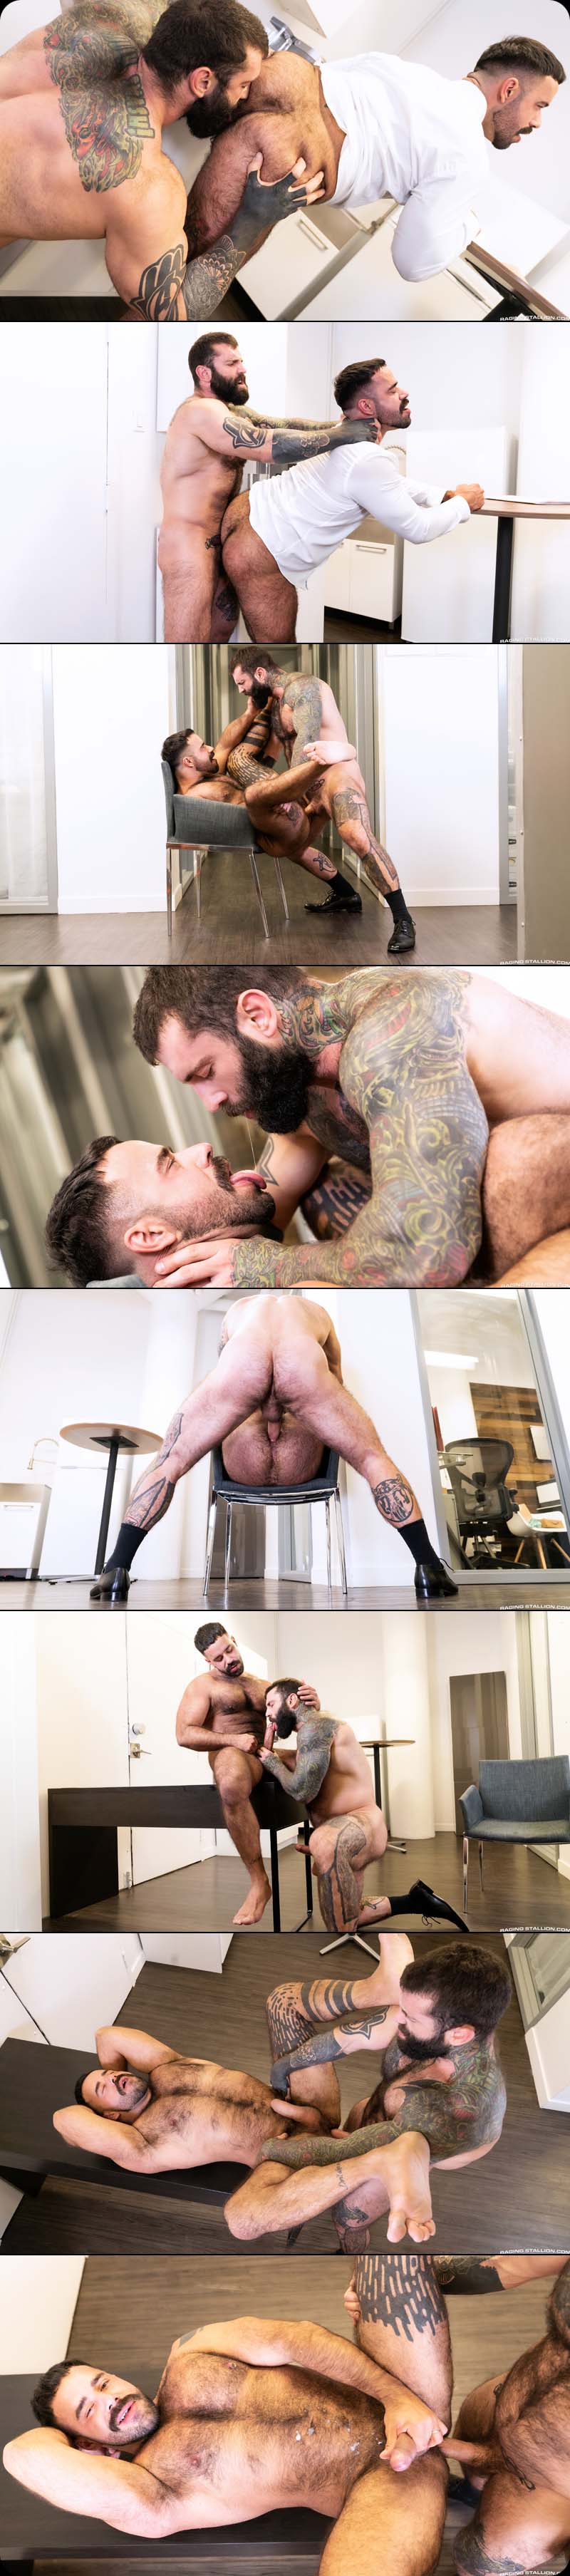 My Boss Is A Dick, Scene One (Markus Kage Tops Teddy Torres) at Raging Stallion